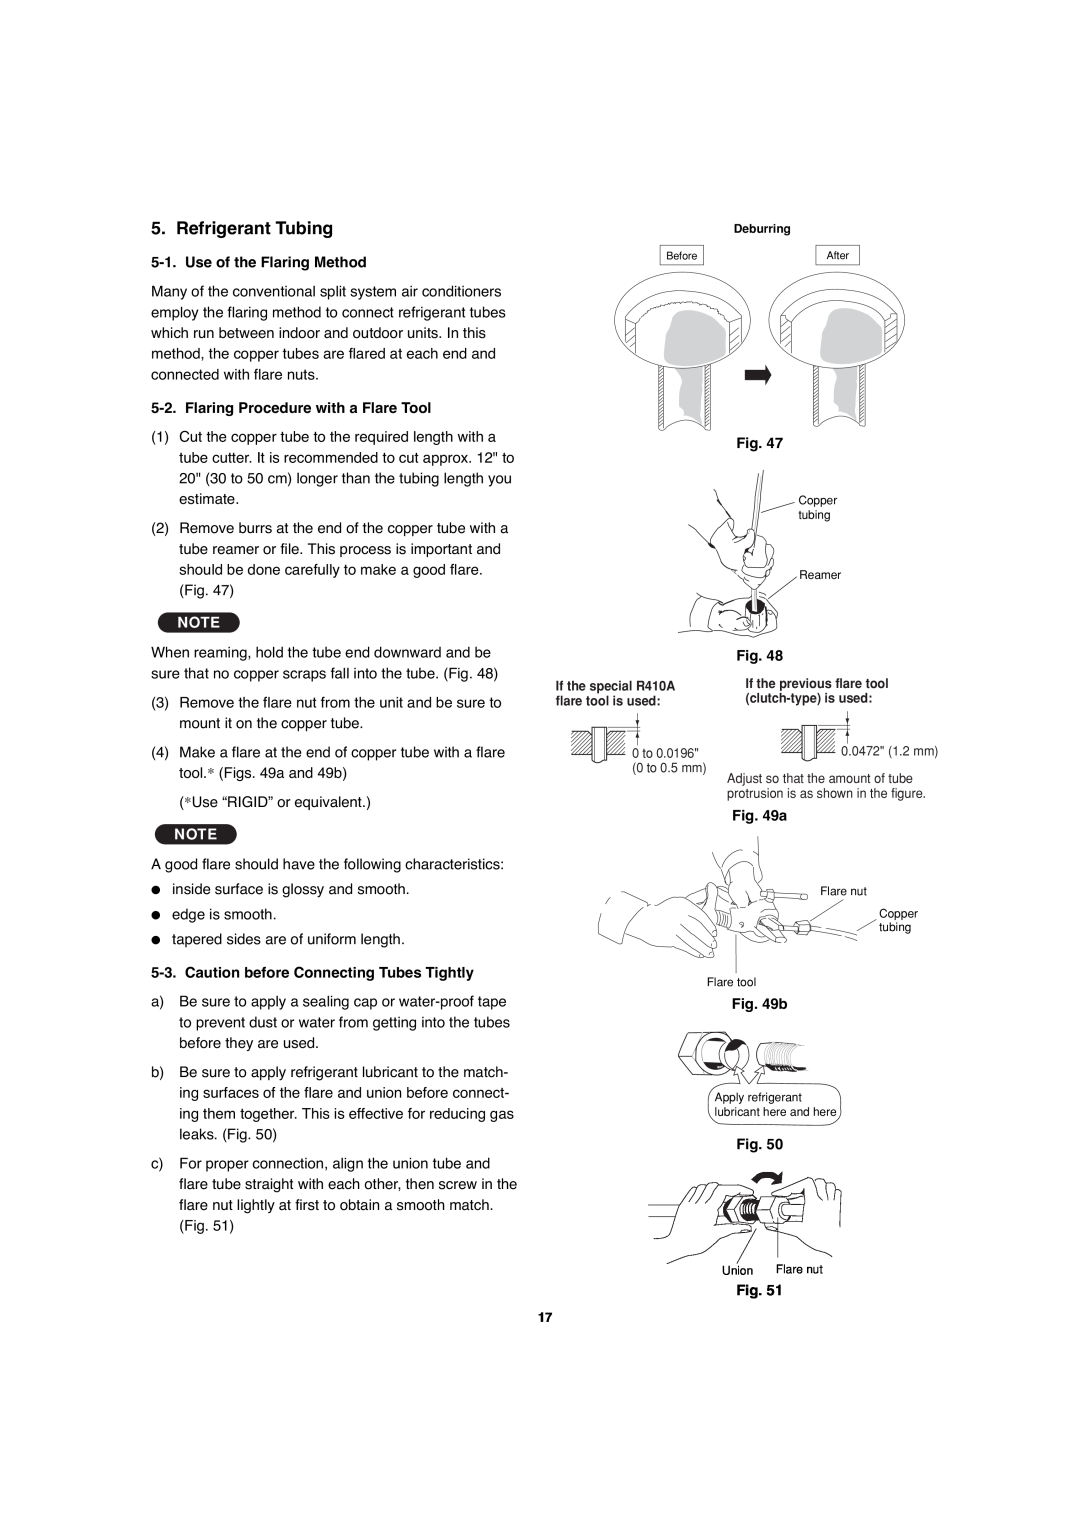 Sanyo CH1271, CH0971 service manual Refrigerant Tubing, Use of the Flaring Method, Flaring Procedure with a Flare Tool 